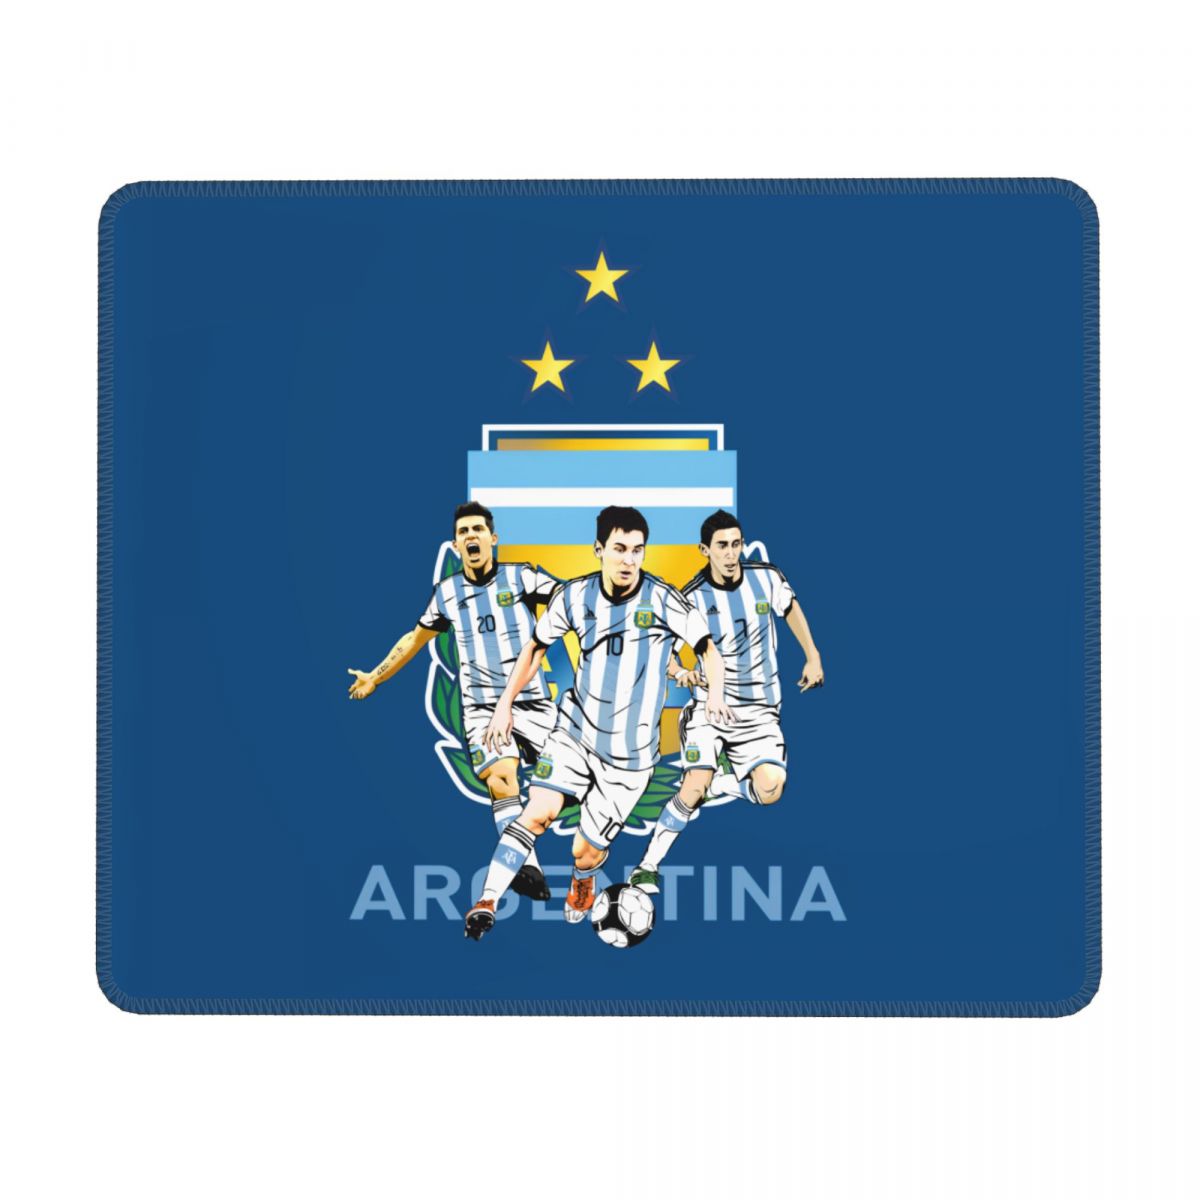 Argentina Players Square Gaming Mouse Pad with Stitched Edge